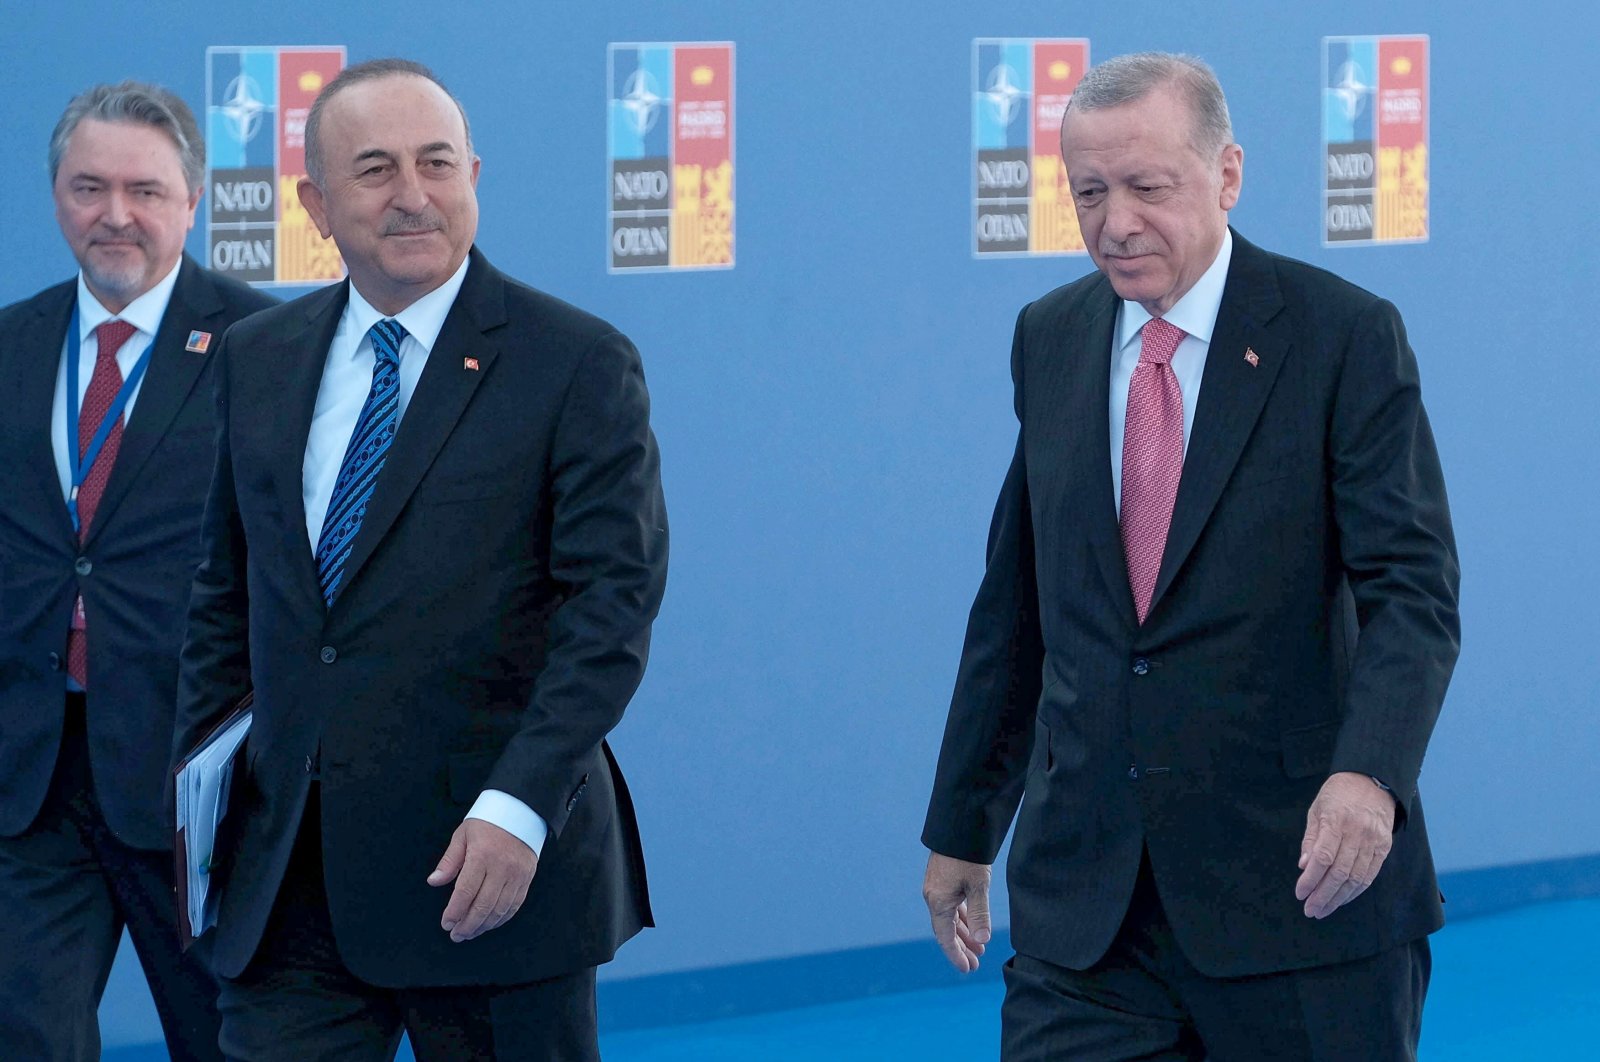 President Recep Tayyip Erdoğan, accompanied by Foreign Minister Mevlüt Çavuşoğlu, arrives to attend the first day of the NATO Summit in Madrid, Spain, June 29, 2022. (EPA)